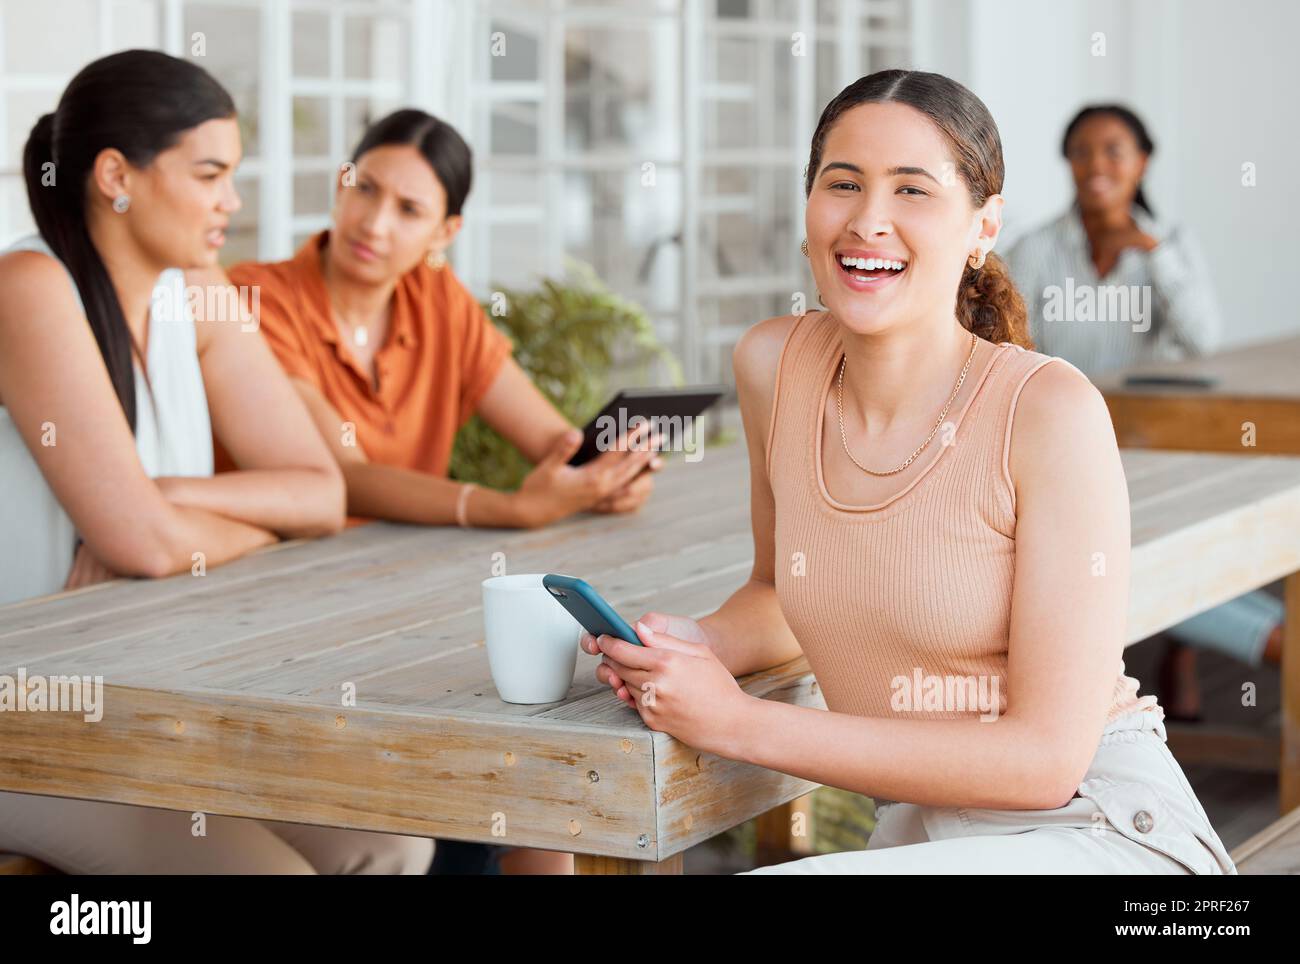 Texting on phone, networking and meeting friends for planning ideas, innovation and strategy for creative startup business. Portrait of woman with diverse group of businesswomen browsing social media Stock Photo